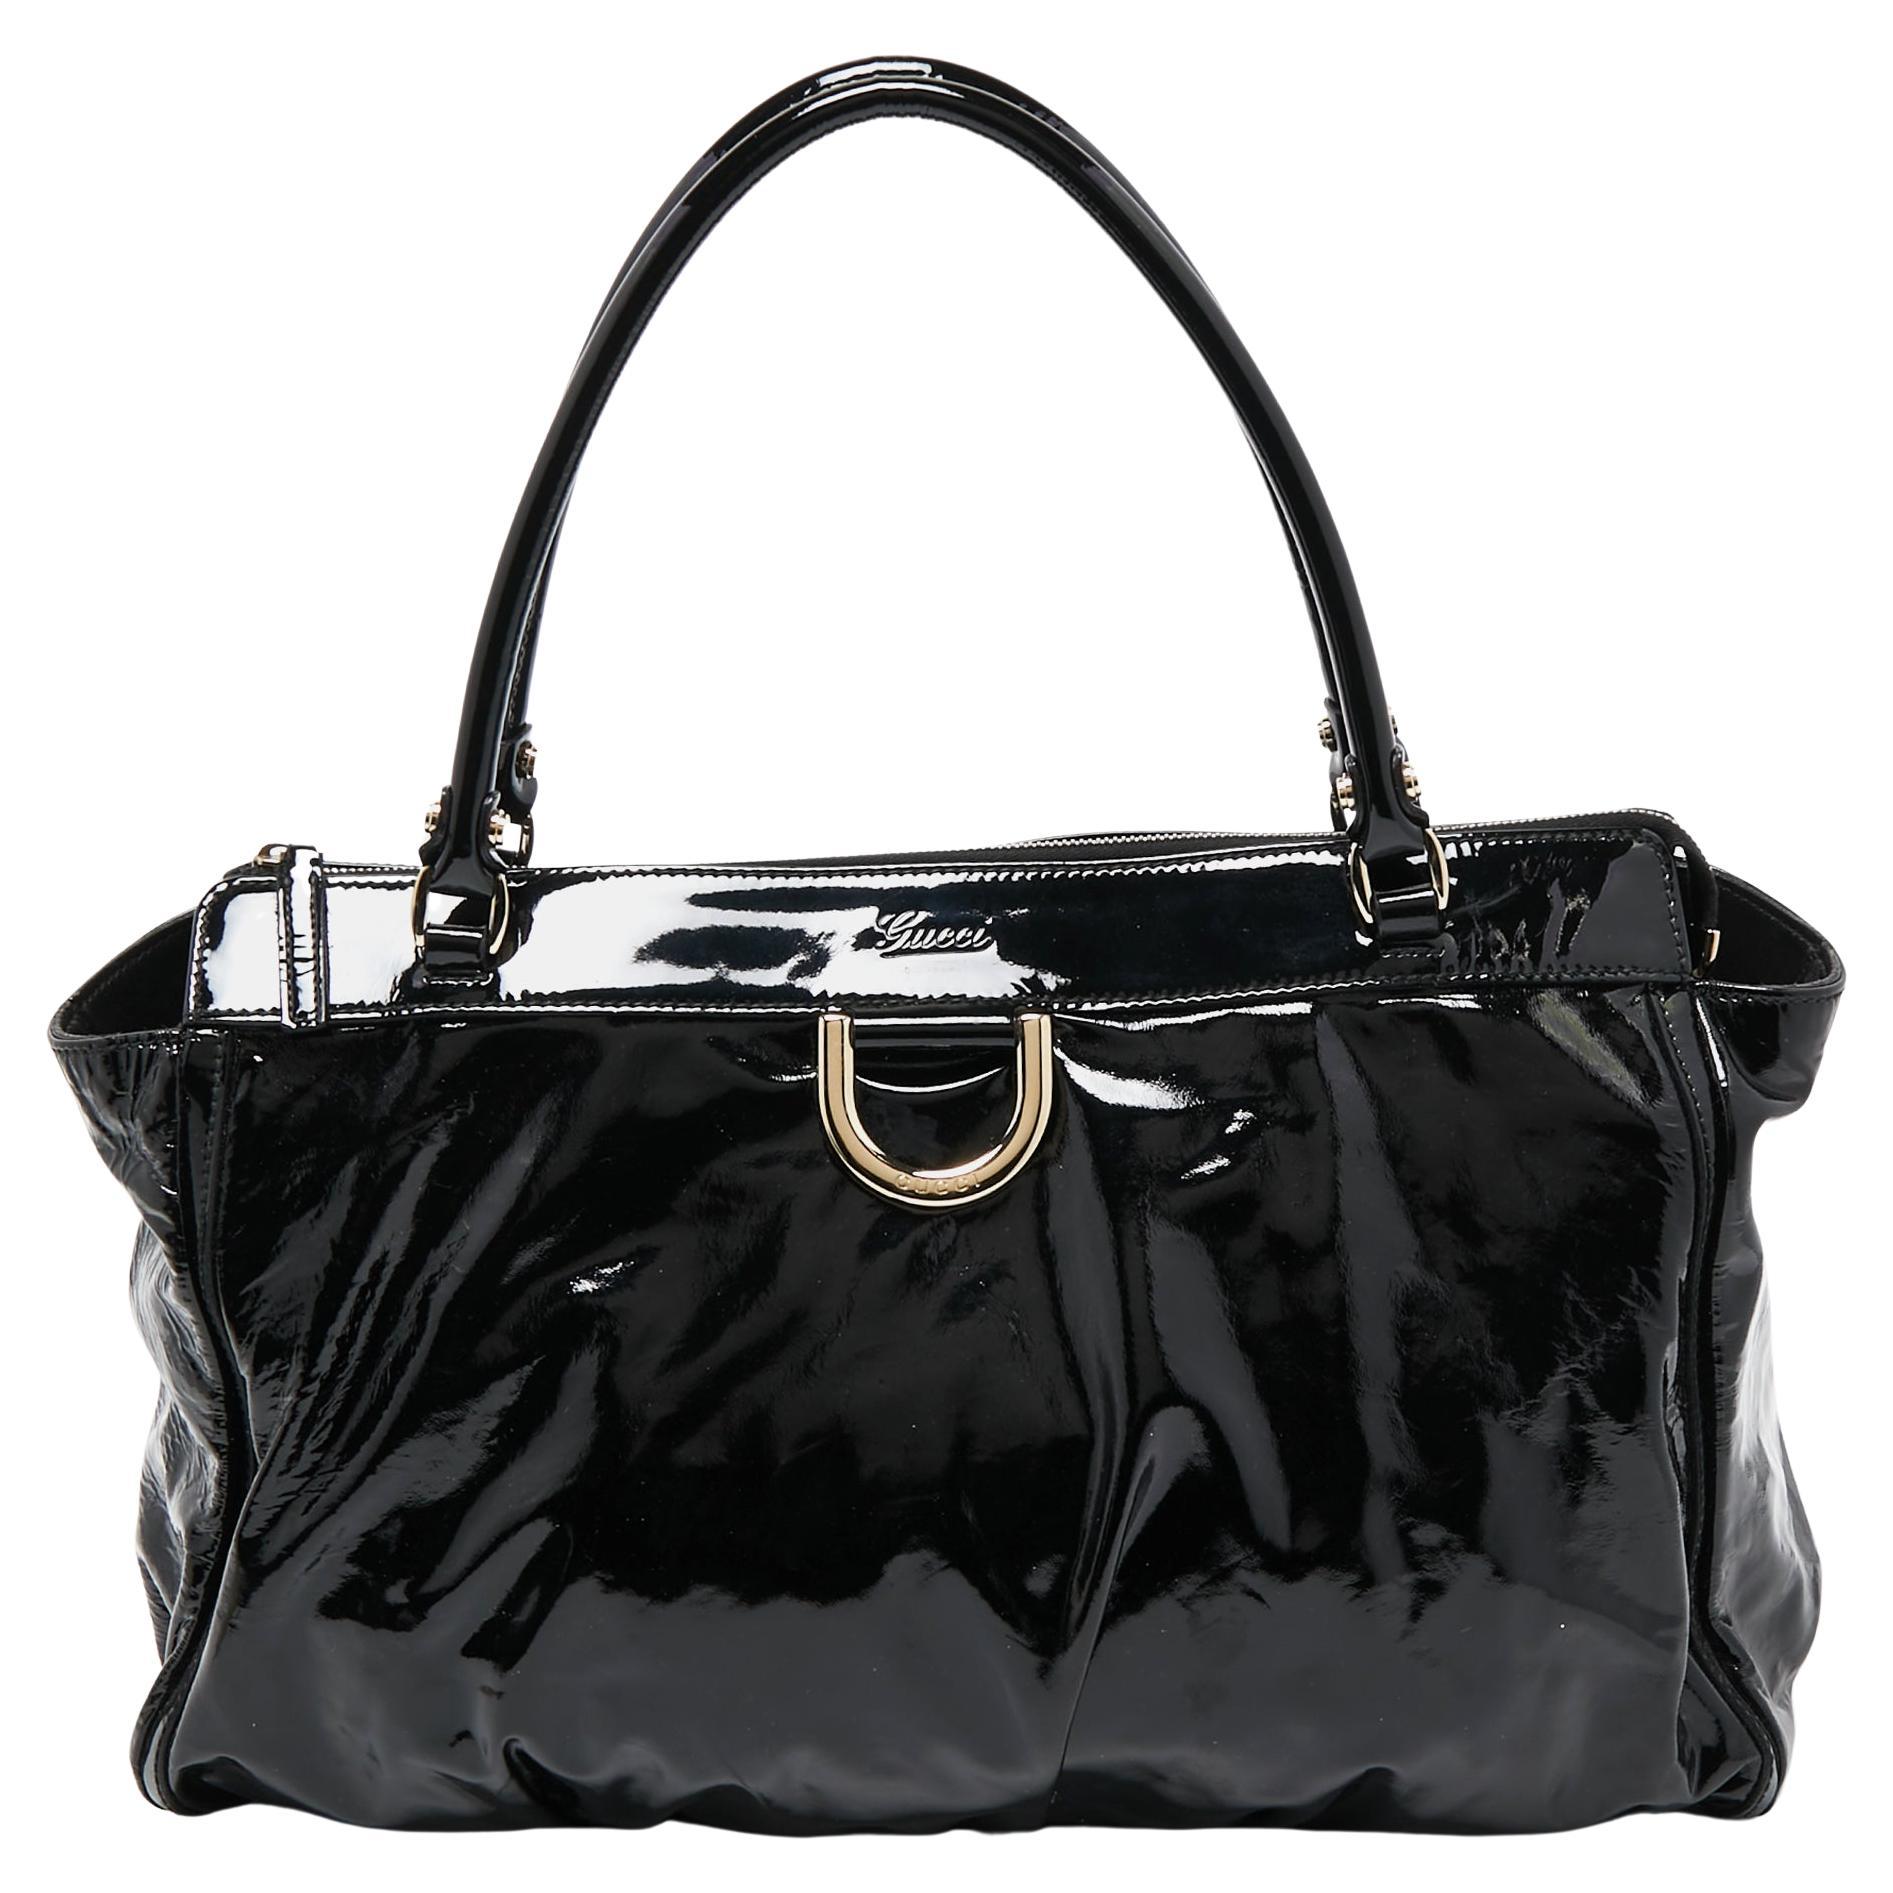 Gucci Black Patent Leather D Ring Tote